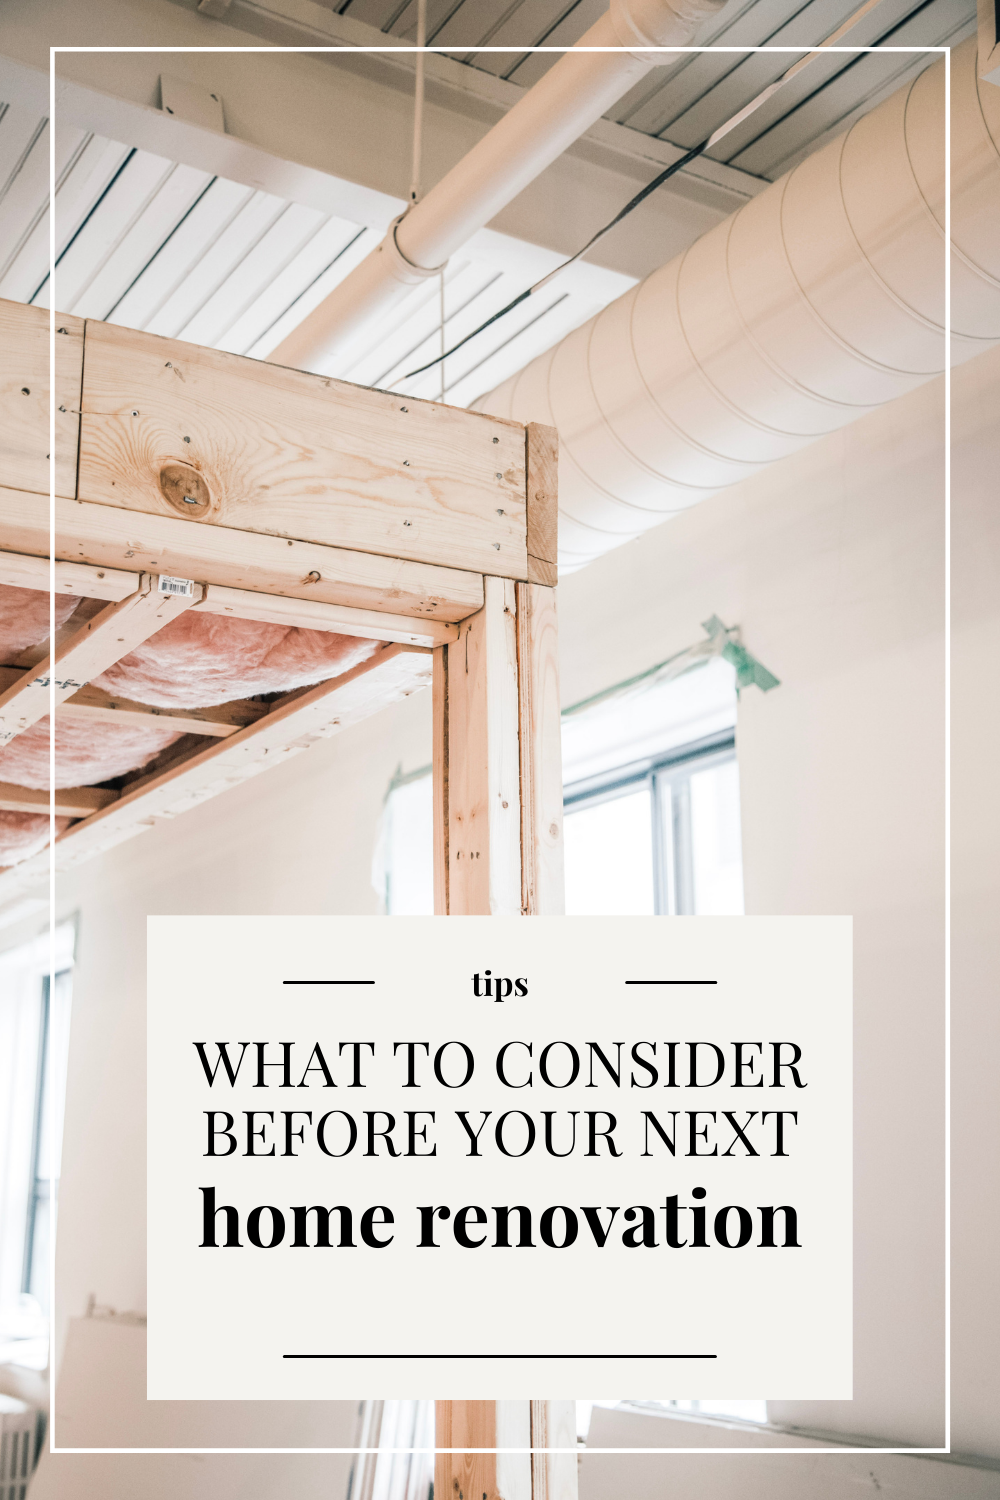 An apartment/home being renovated. This article covers helpful considerations before embarking on your next home renovation project.